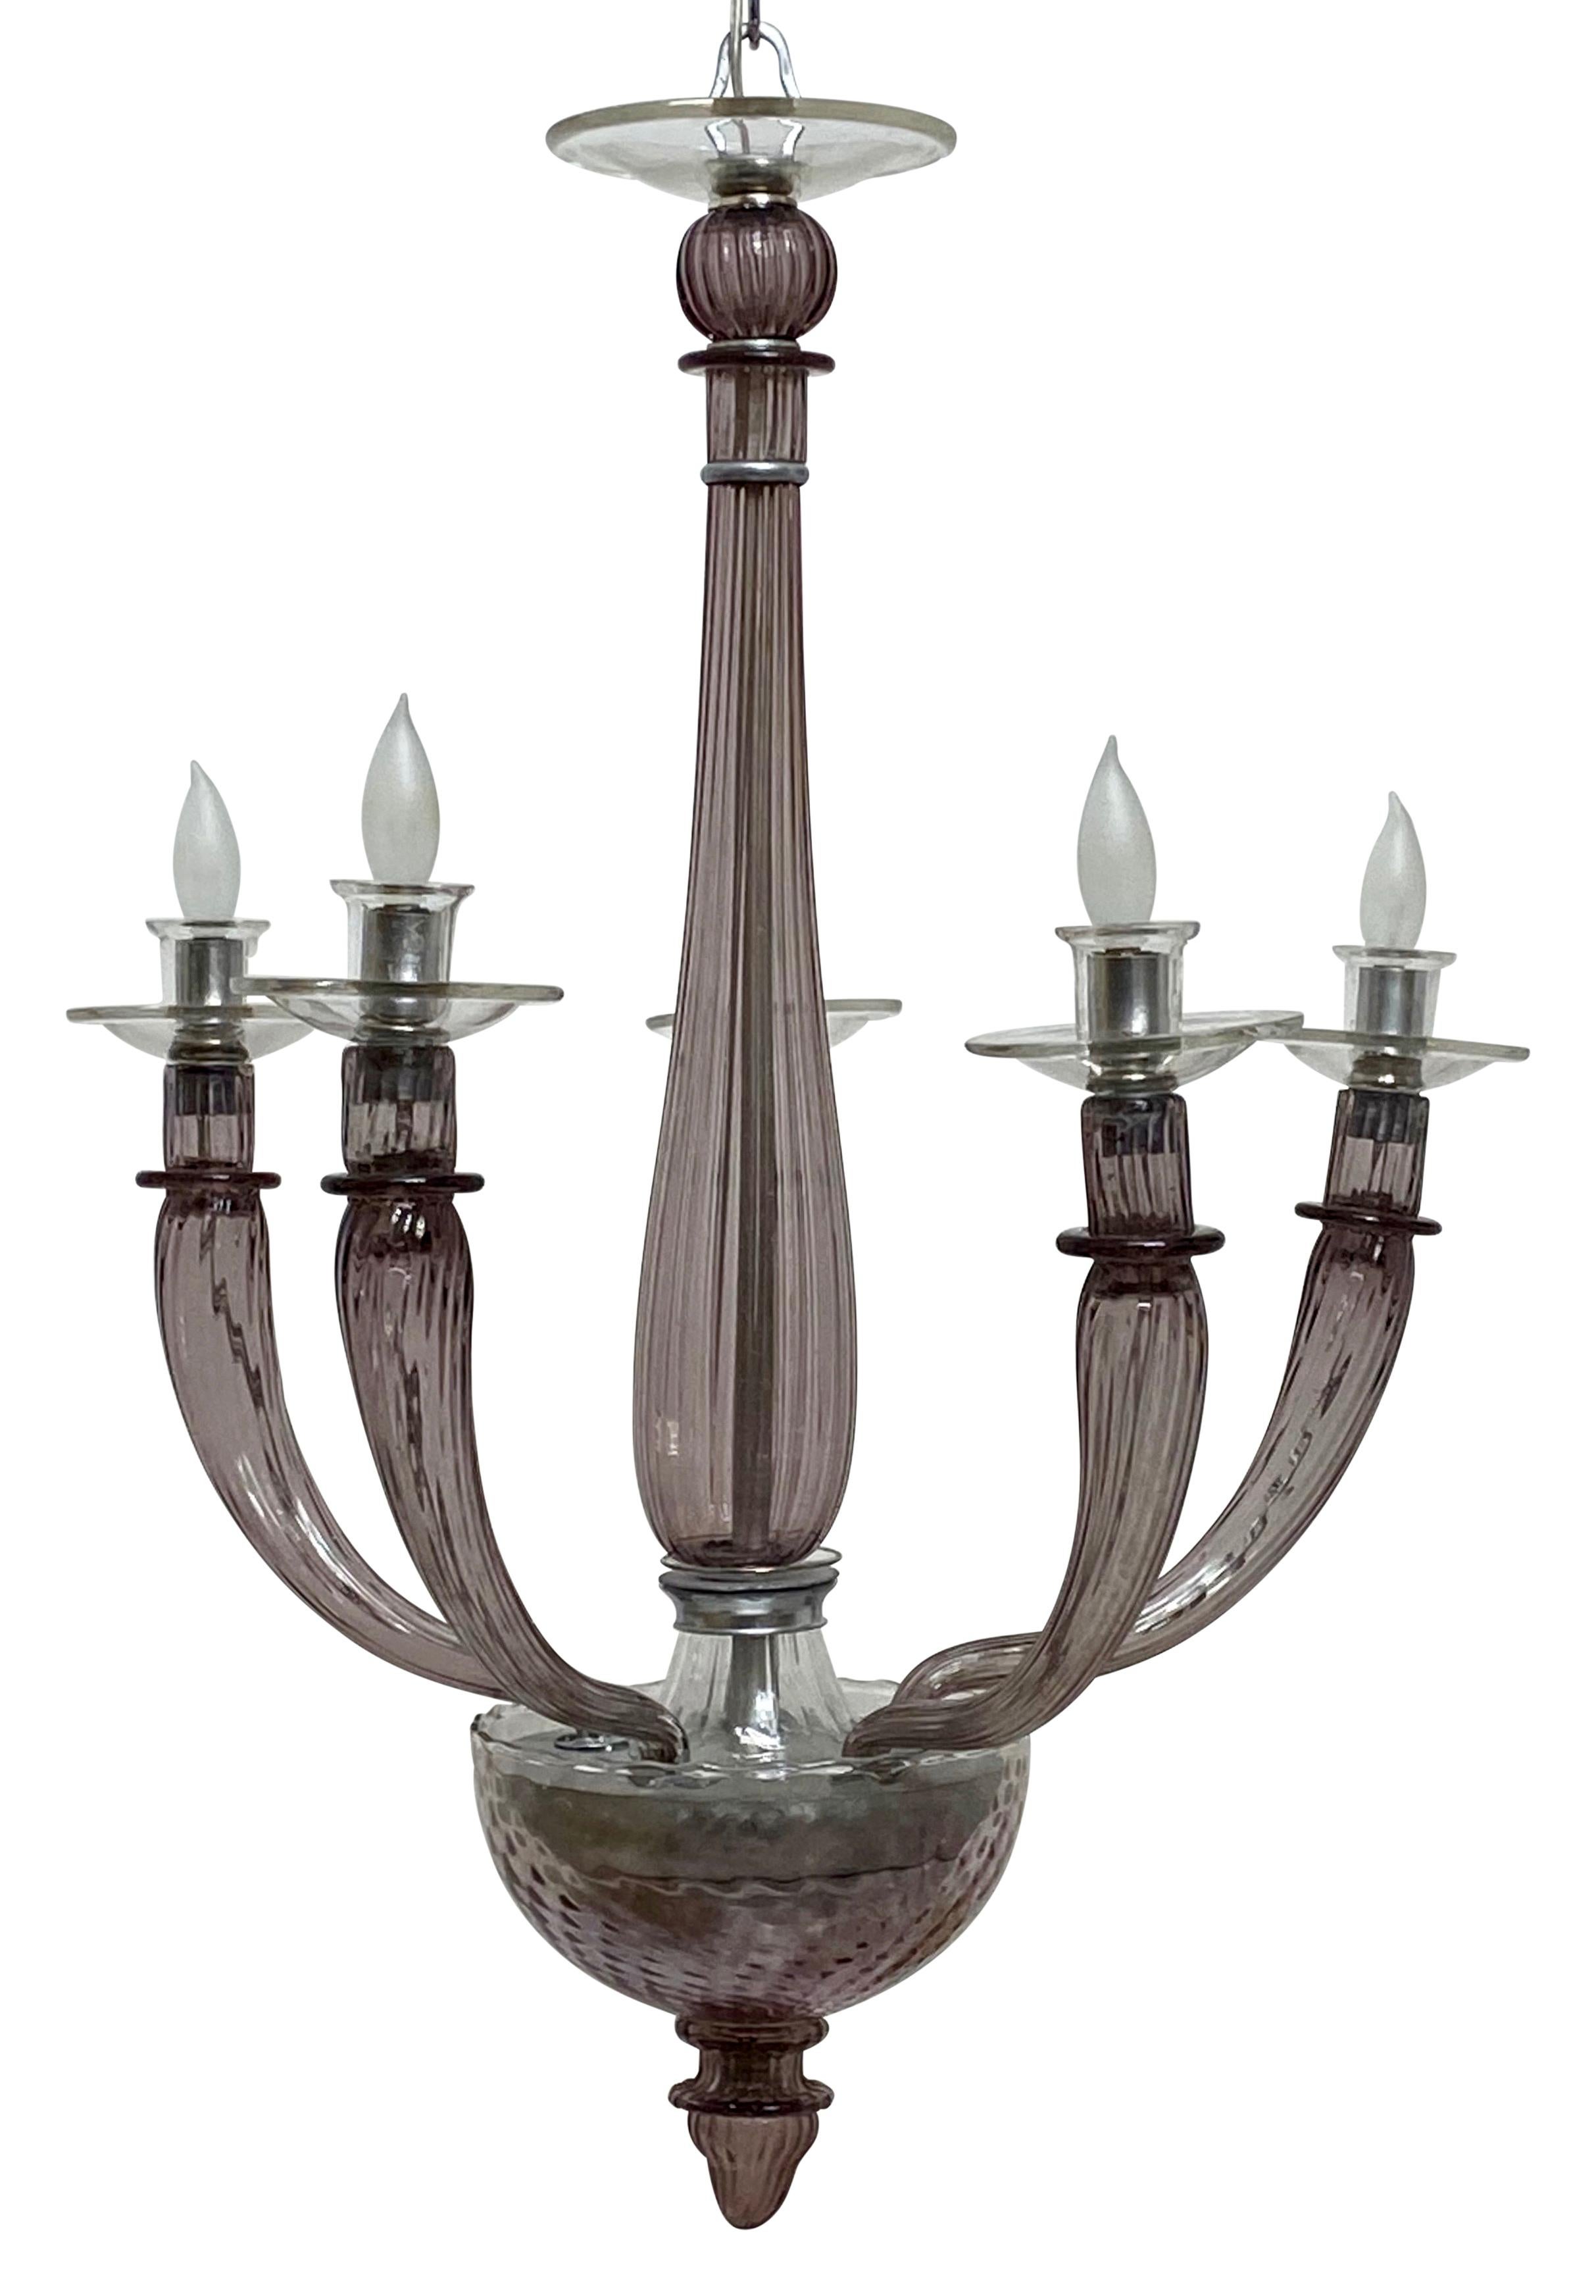 Beautiful amethyst color art glass light fixture, most likely made by Venini,
Italy, mid-20th century.
Impressive and large scale in size.
Fully re-stored and re-wired.
Holds chandelier size light bulbs.
The chain measures 28